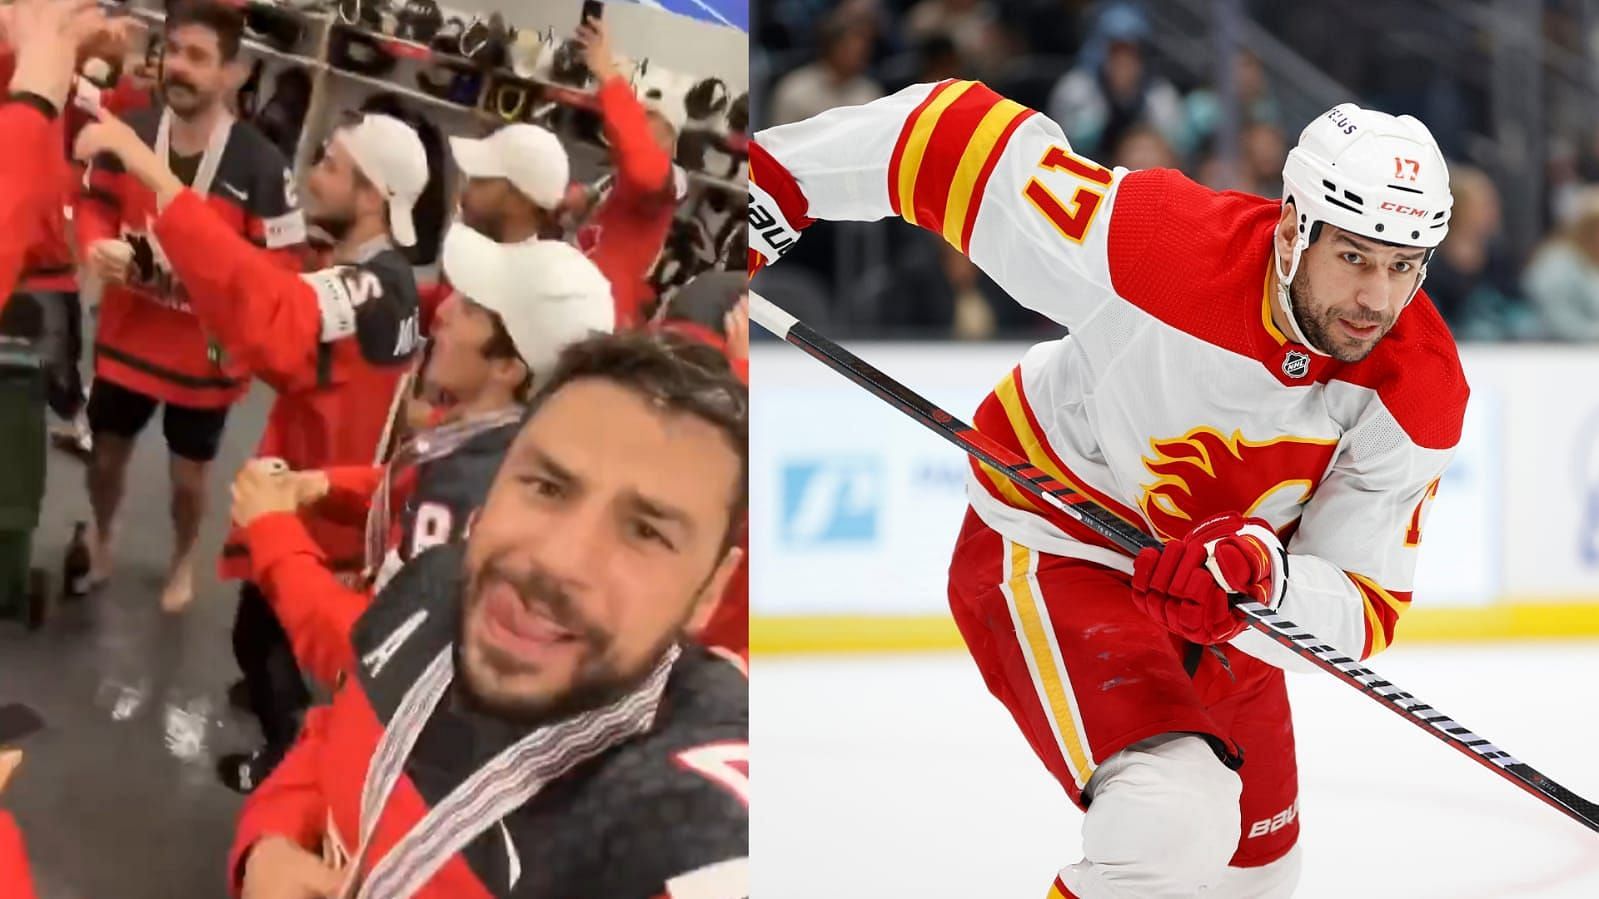 Milan Lucic celebrates with teammates after Canada win World Hockey Championship.